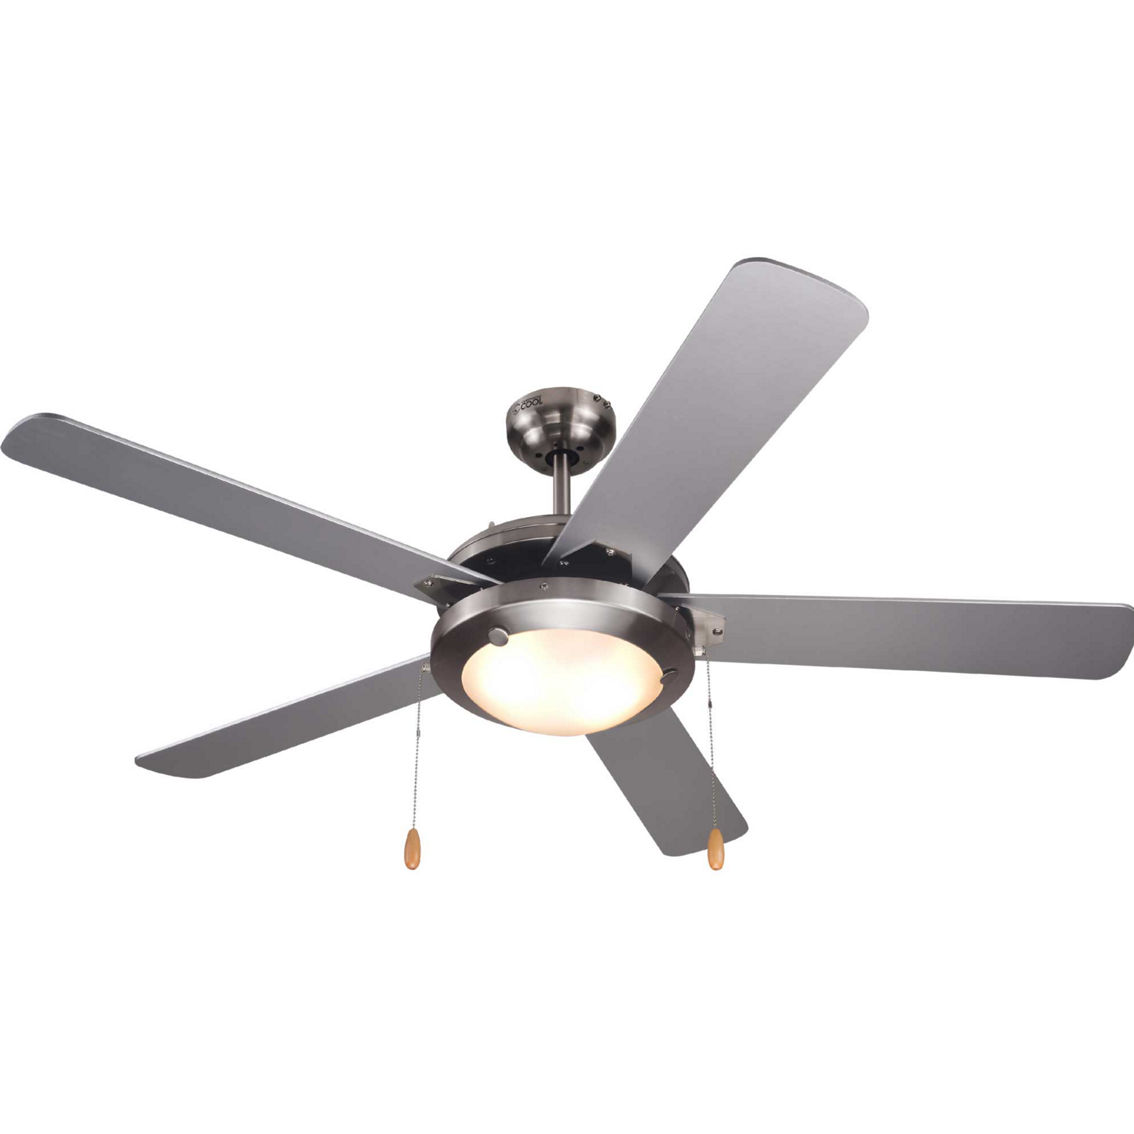 Commercial Cool 52 in. Ceiling Fan - Image 1 of 7